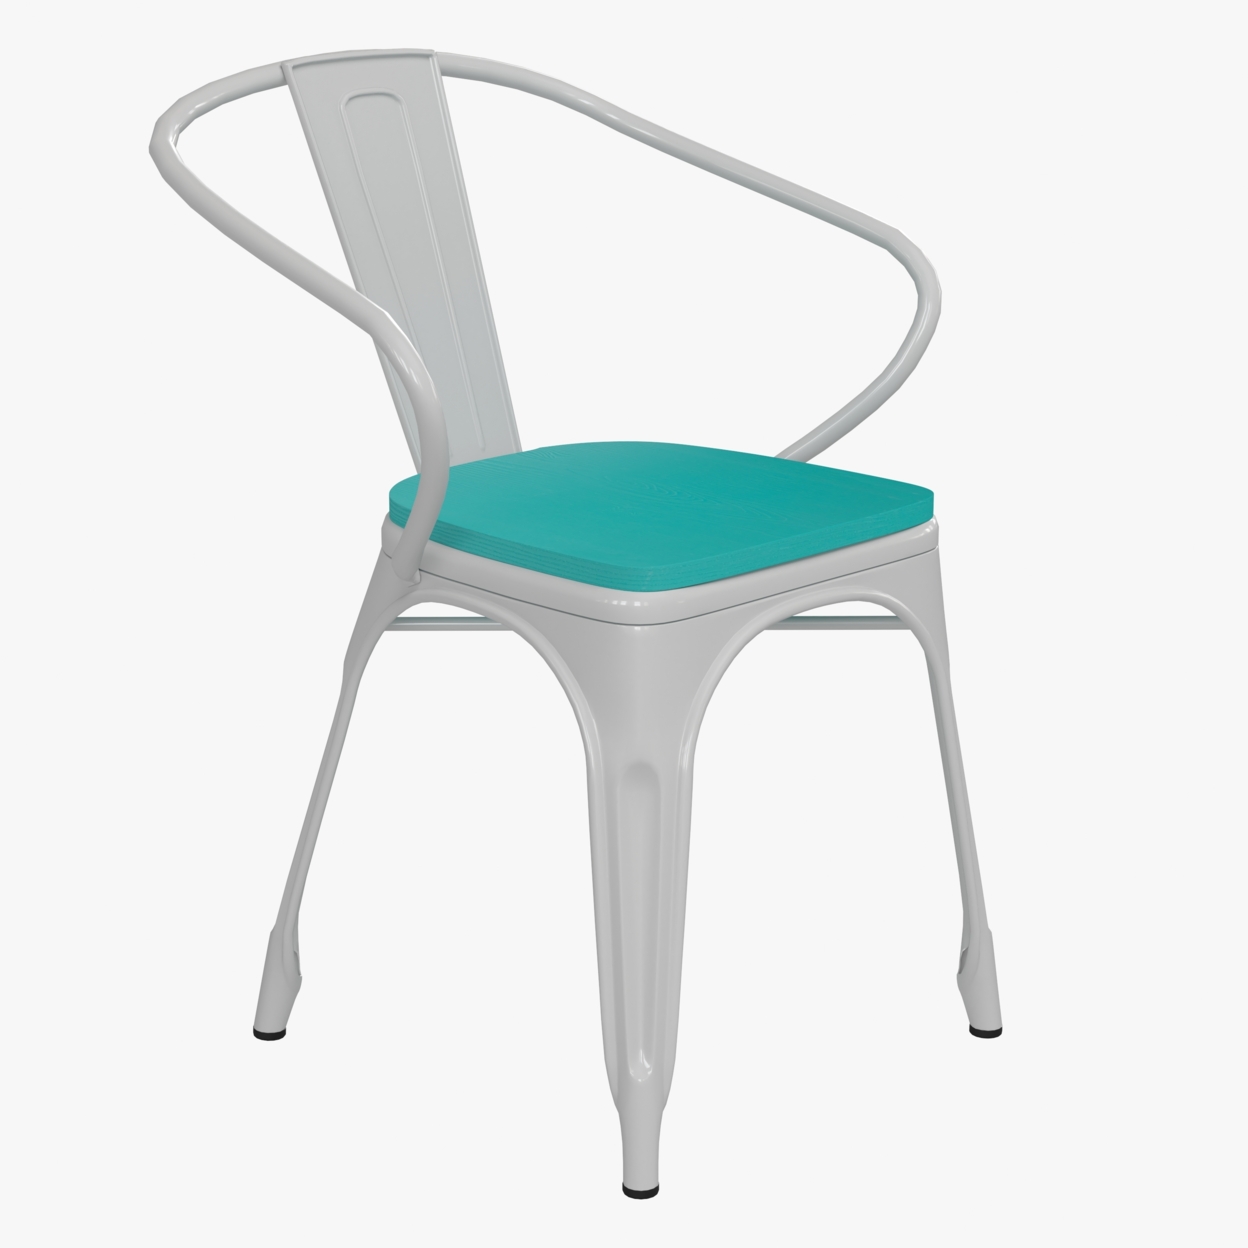 Metal Chair, Open Design Curved Arms, Polyresin Teal Blue Seat, White